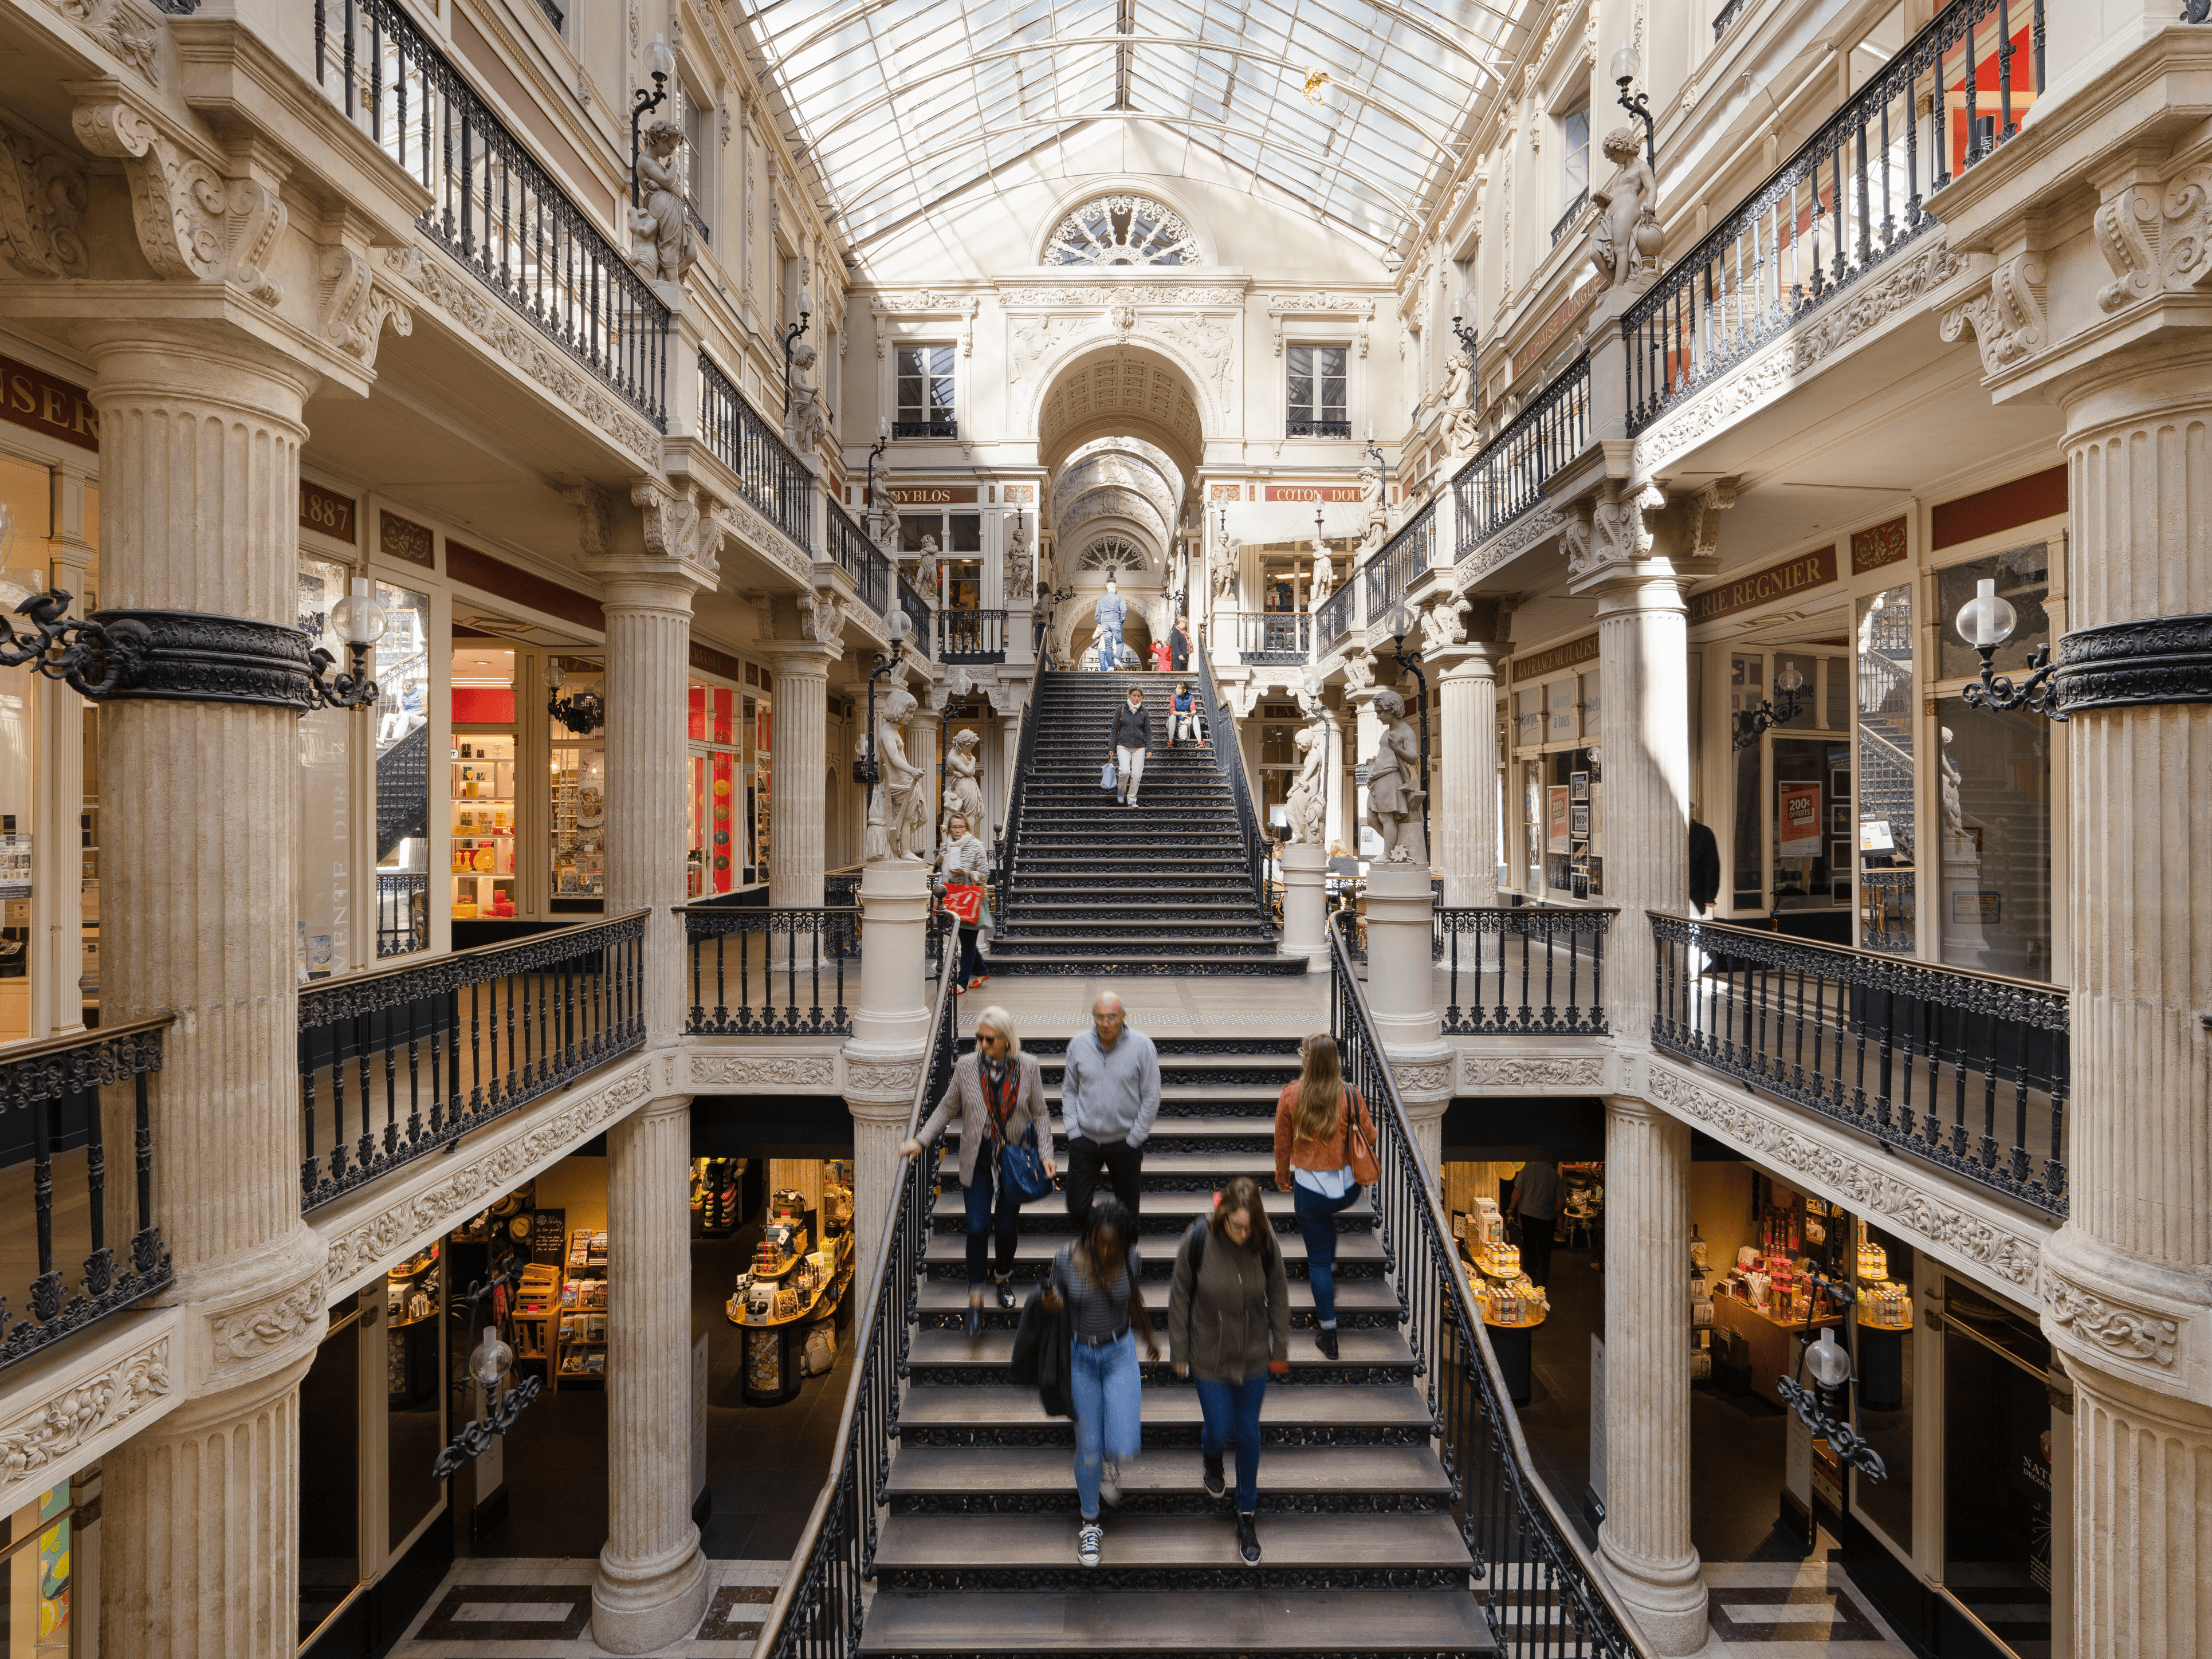 Shopping arcade in Nantes town centre, Passage Pommeraye (photo © Philippe Piron)